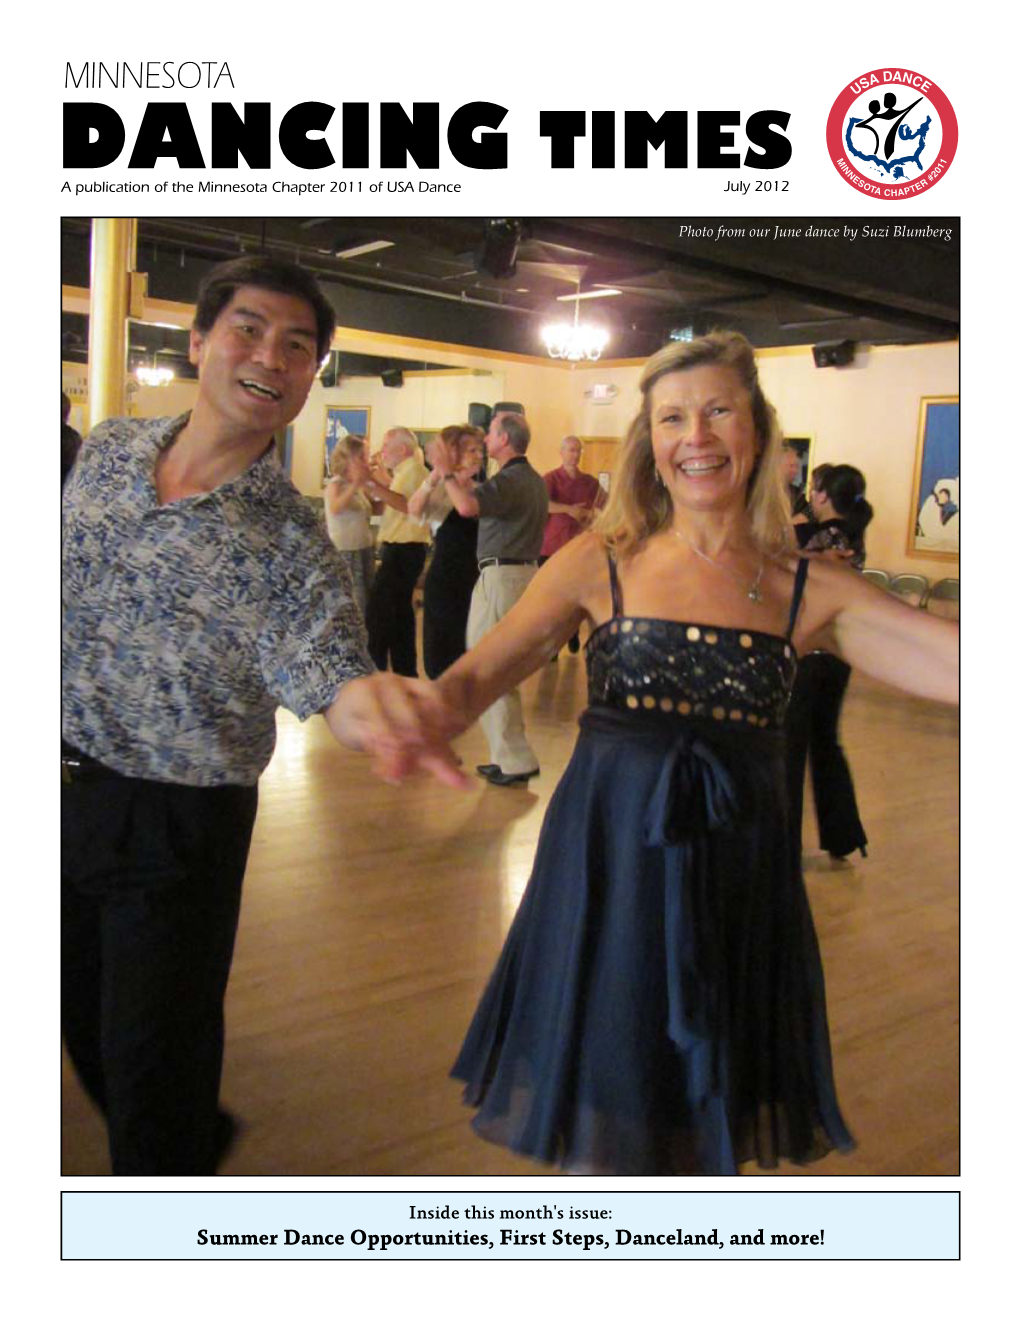 MINNESOTA DANCING TIMES a Publication of the Minnesota Chapter 2011 of USA Dance July 2012